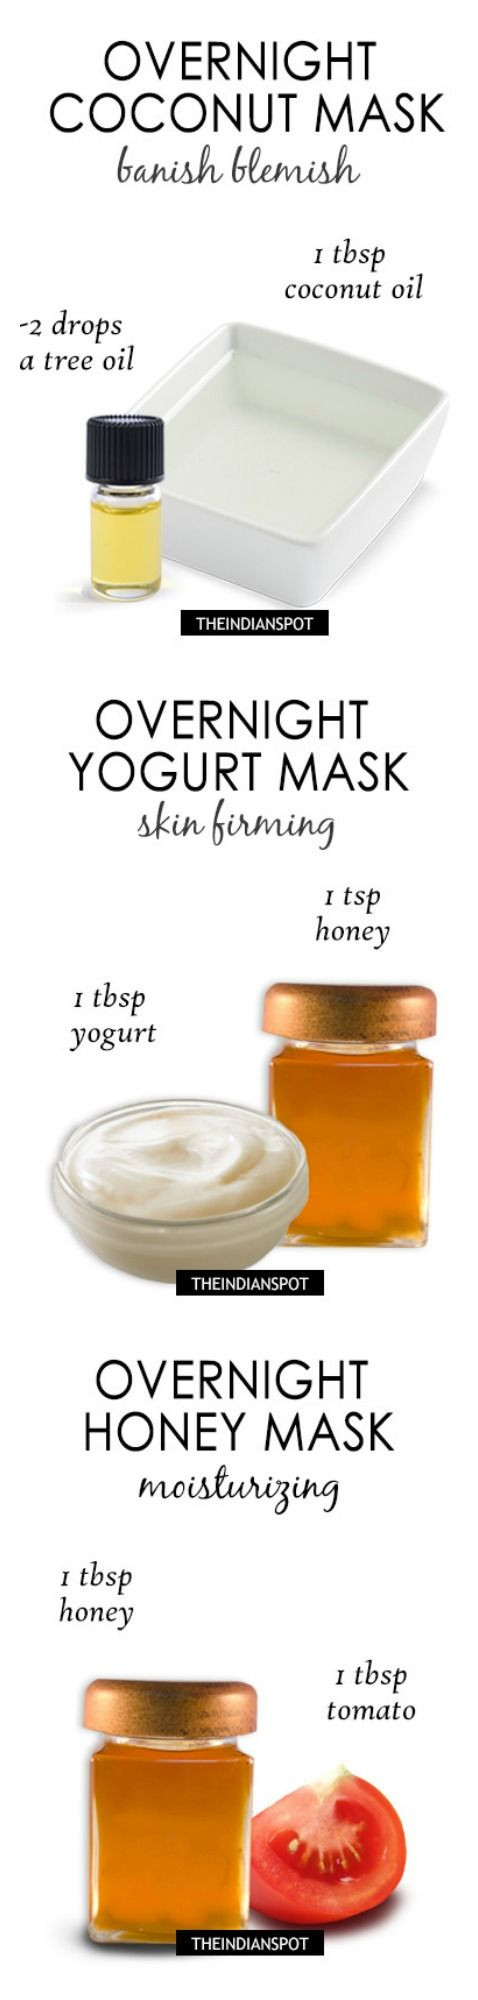 DIY Overnight Face Mask For Acne
 TOP 6 OVERNIGHT FACE MASKS FOR CLEAR HEALTHY AND GLOWING